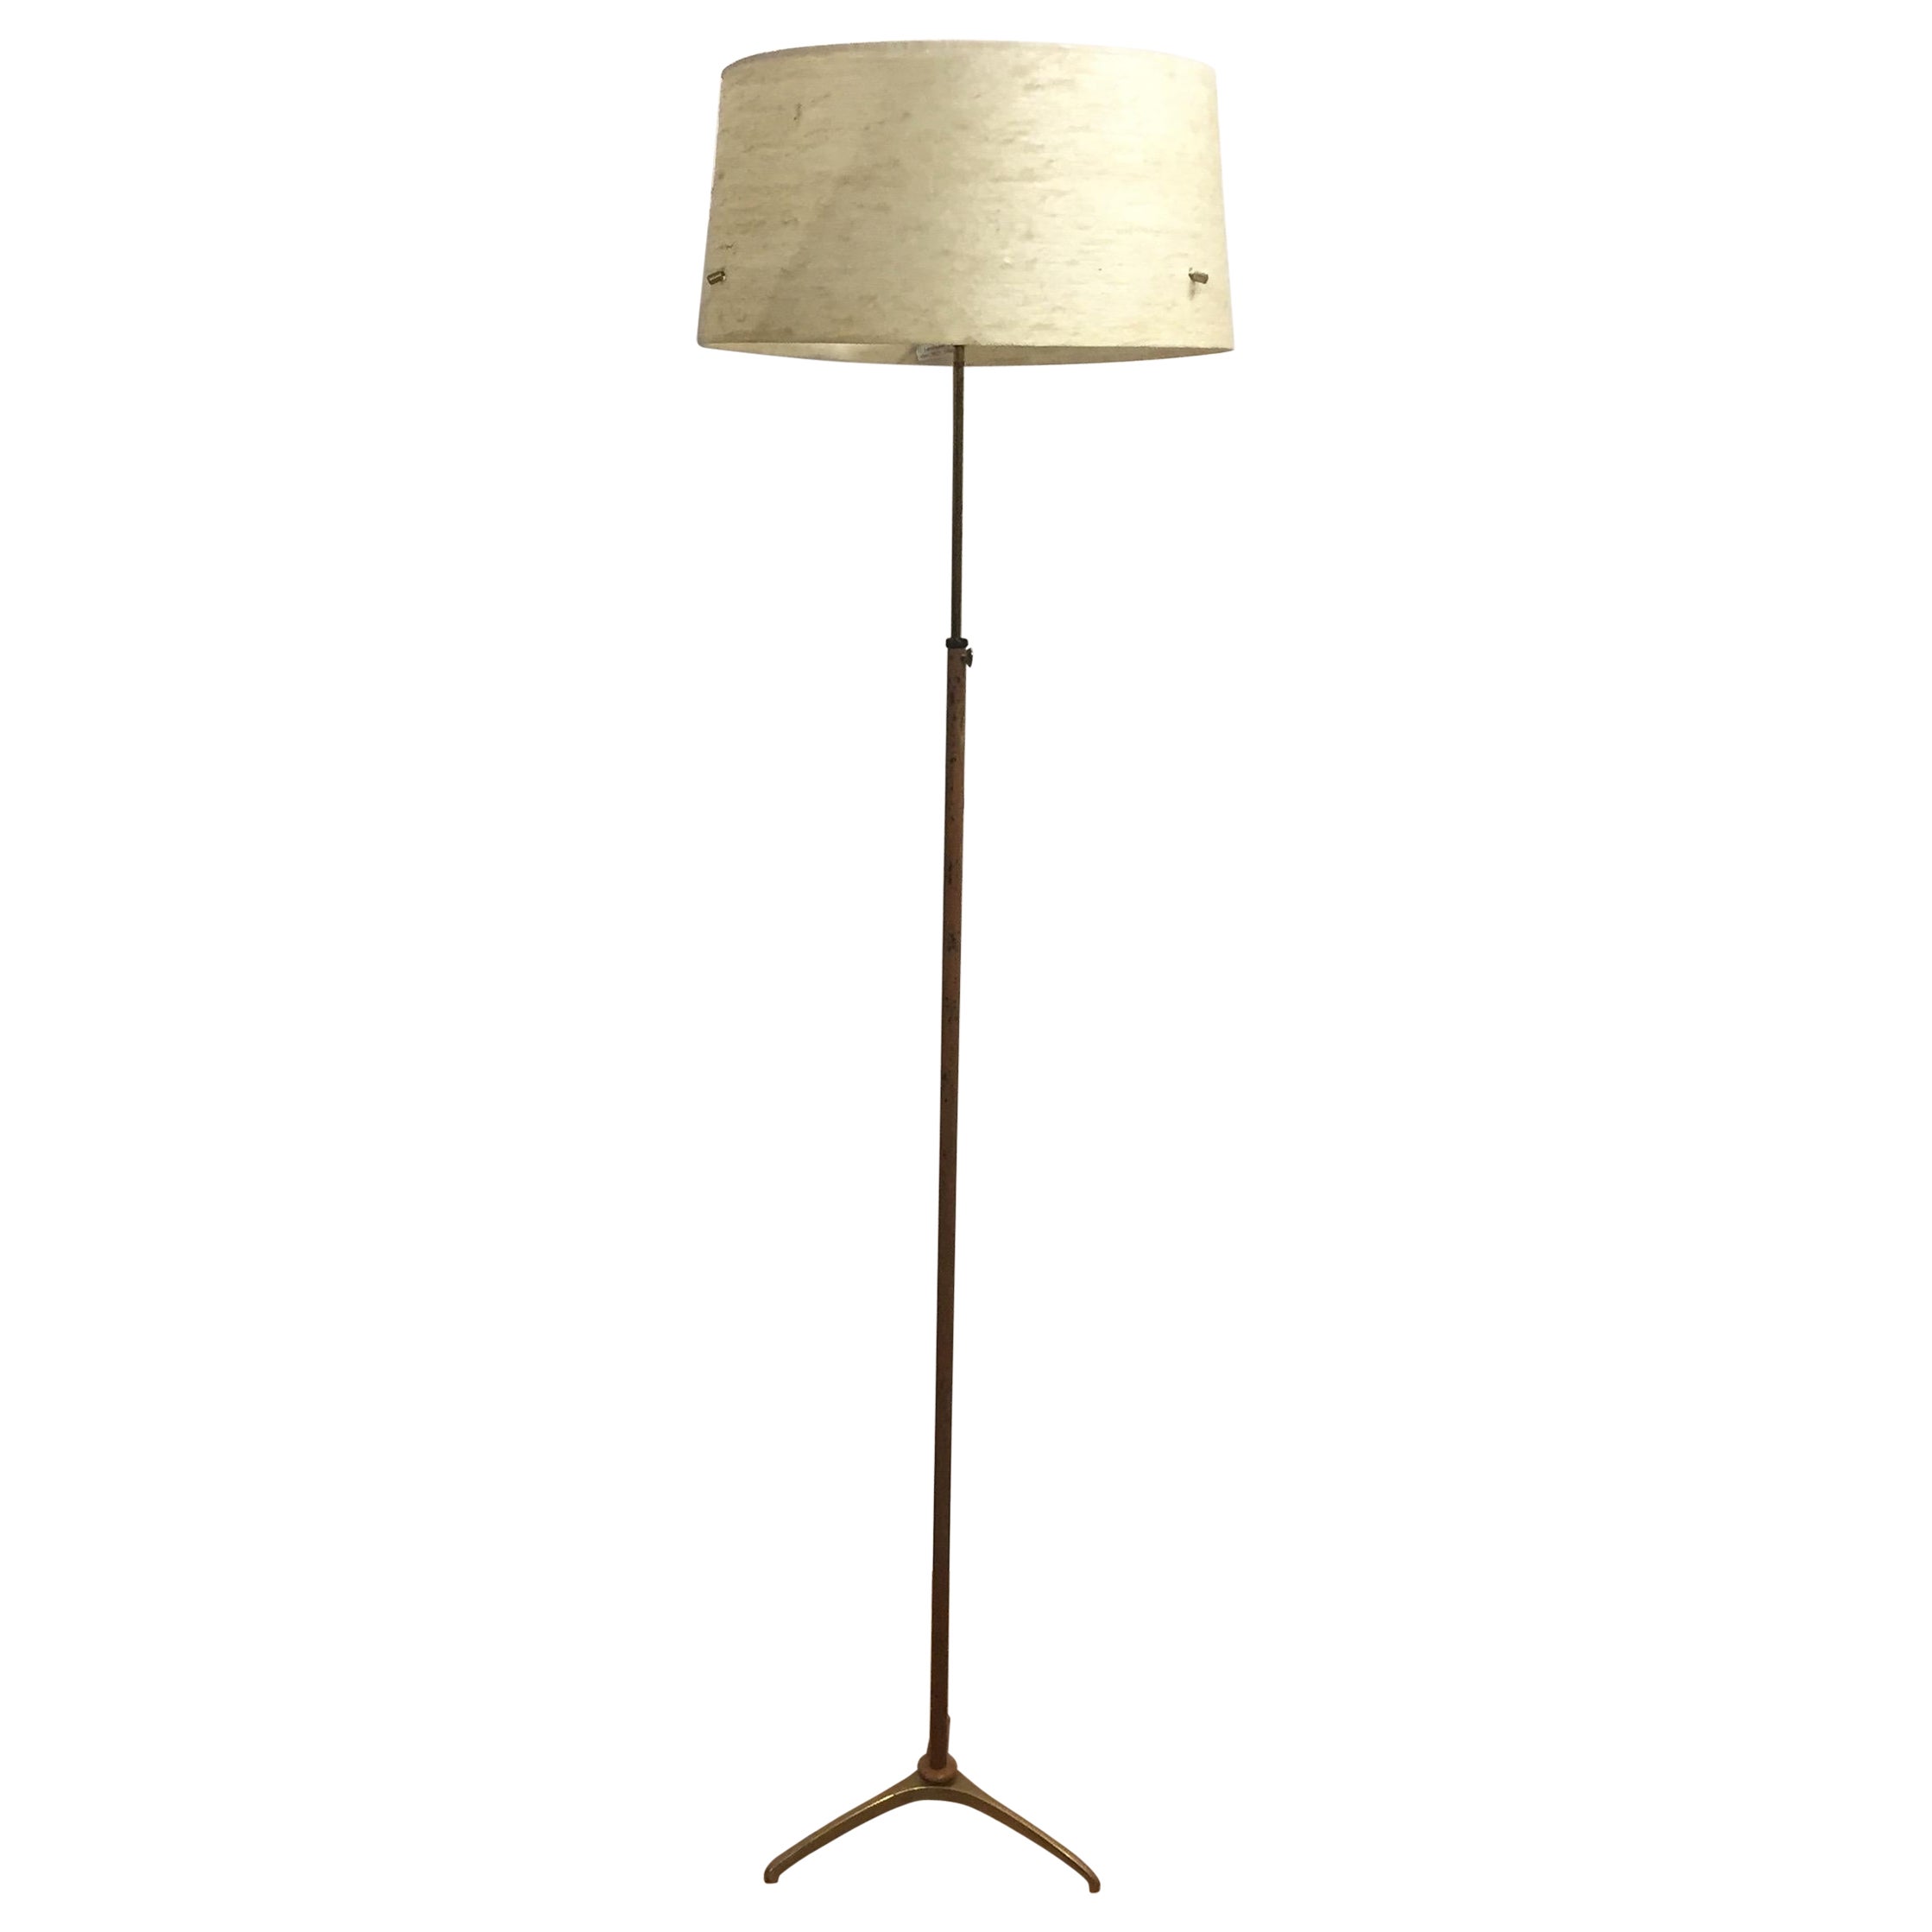 Floor lamp, Italy, 1960s, fiberglass and laiton For Sale